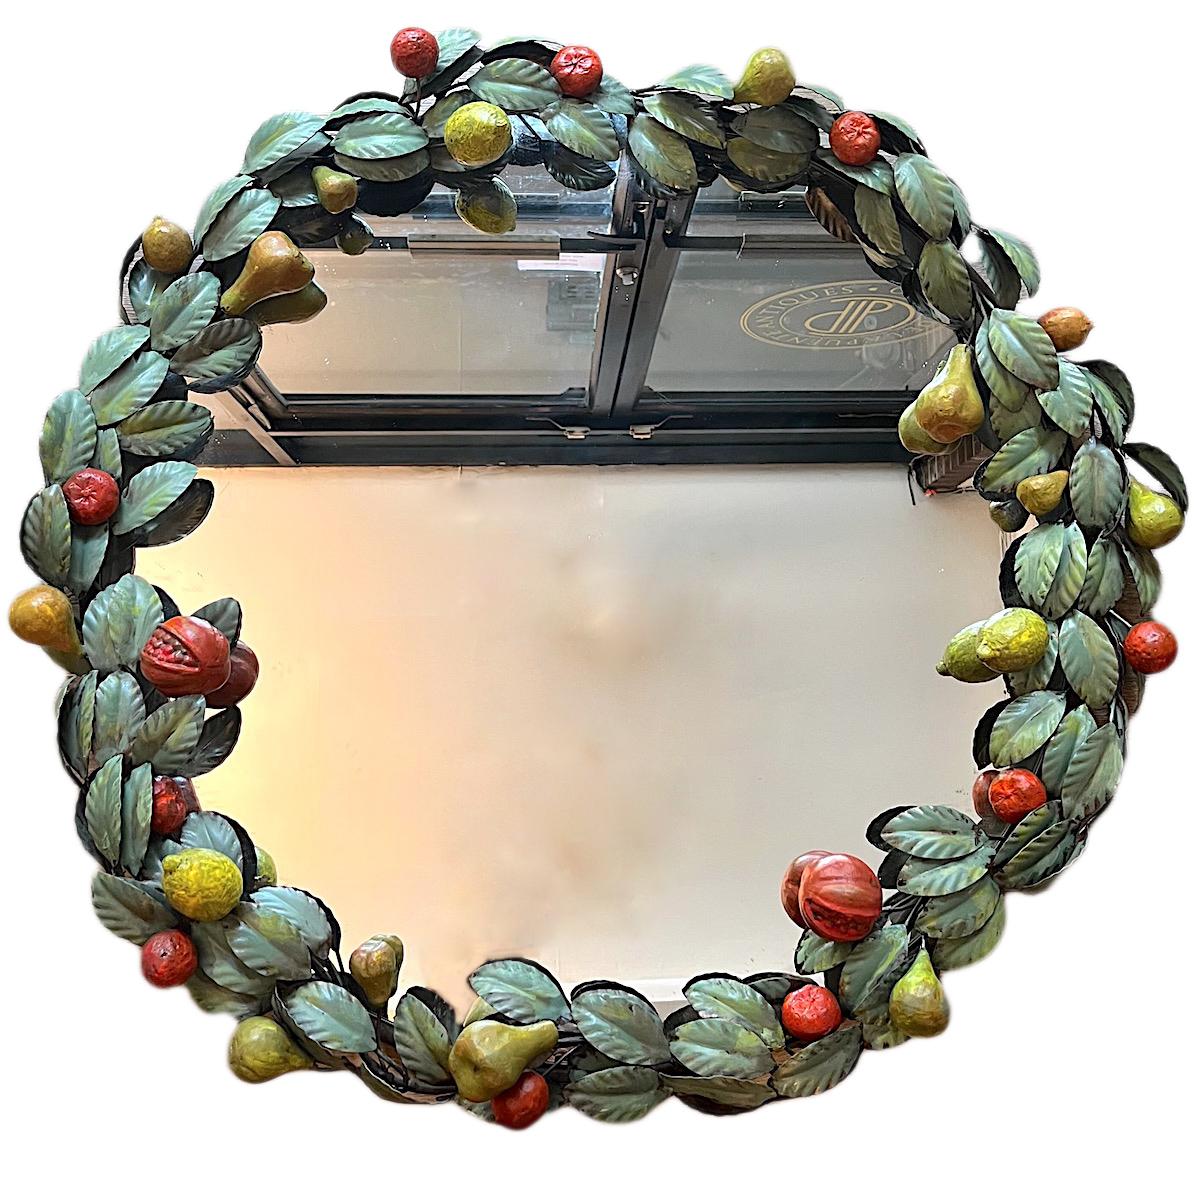 A circa 1950's Italian painted tole mirror with laurel leaves and fruits.

Measurements:
Diameter: 33.5